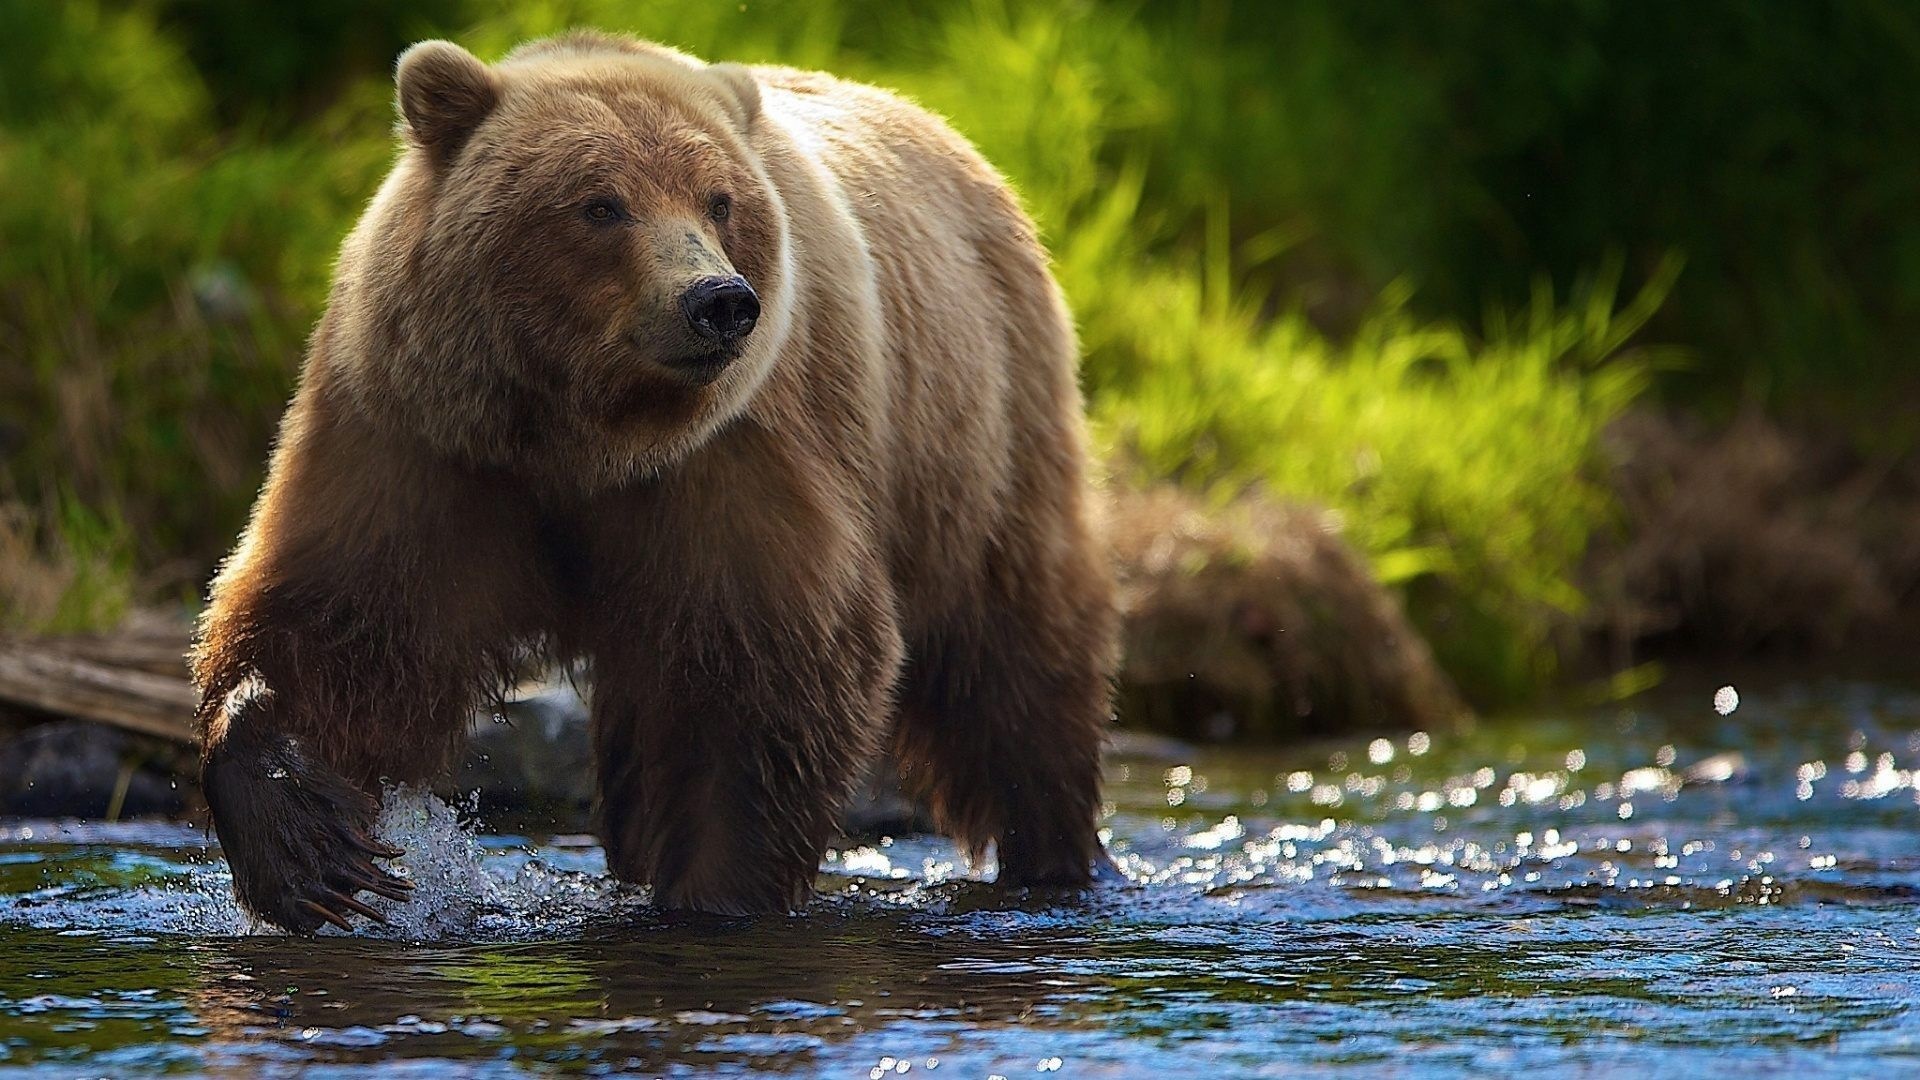 Grizzly Bear, Wildlife photography, 4K resolution, Stunning backgrounds, 1920x1080 Full HD Desktop